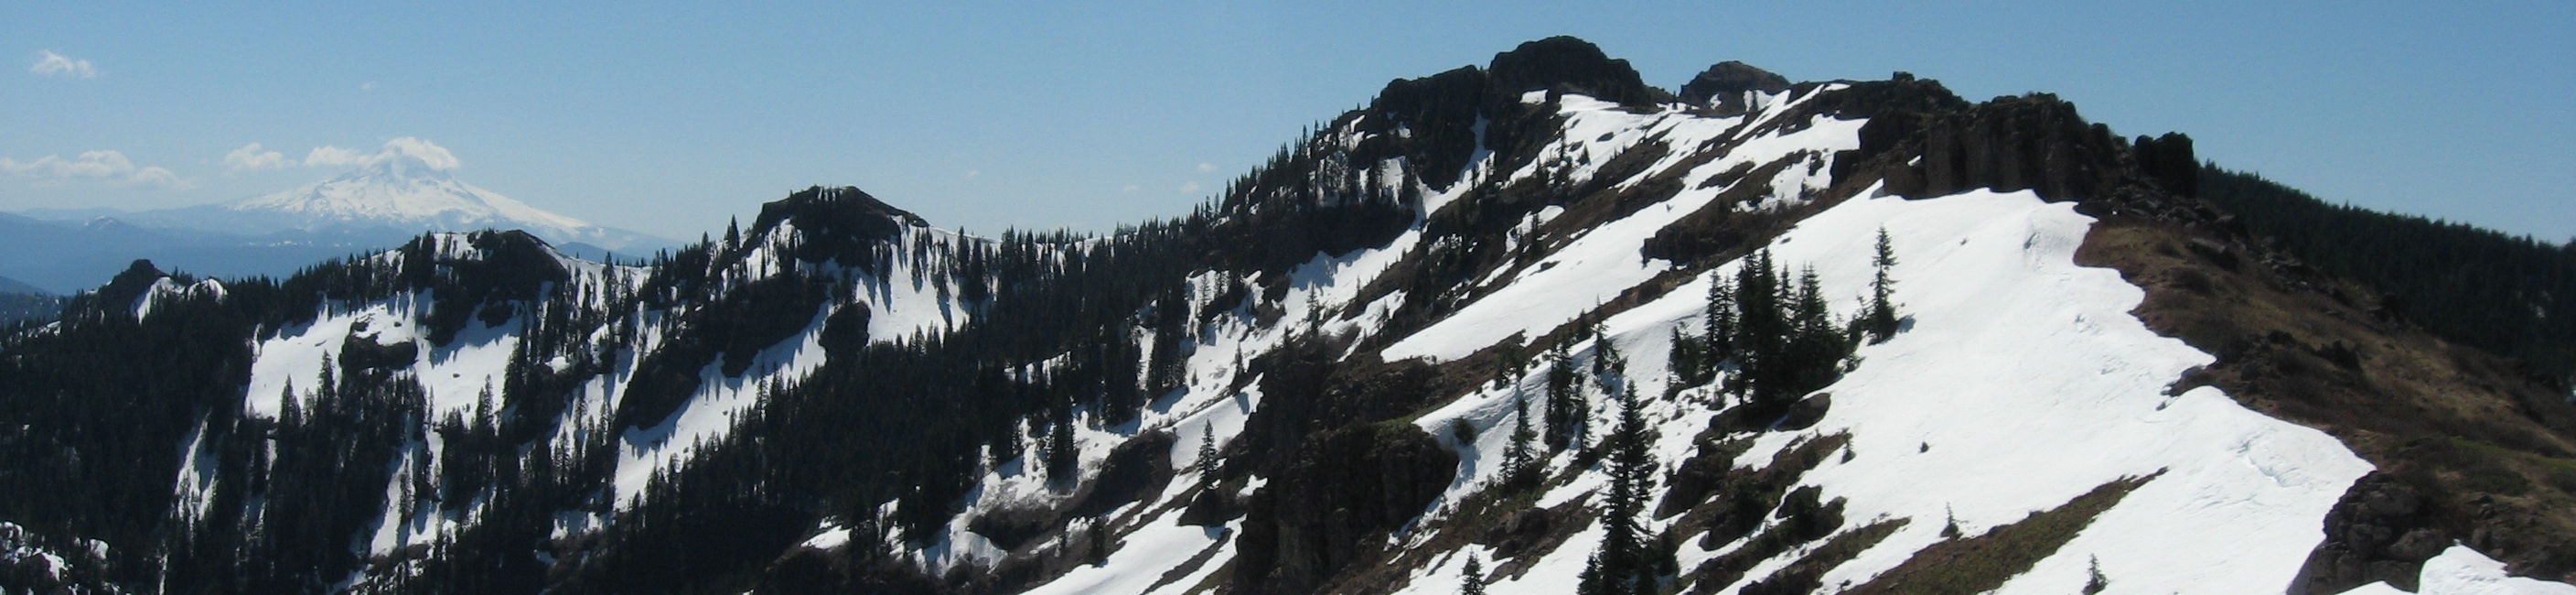 View from the Silver Star Trail - May 2013